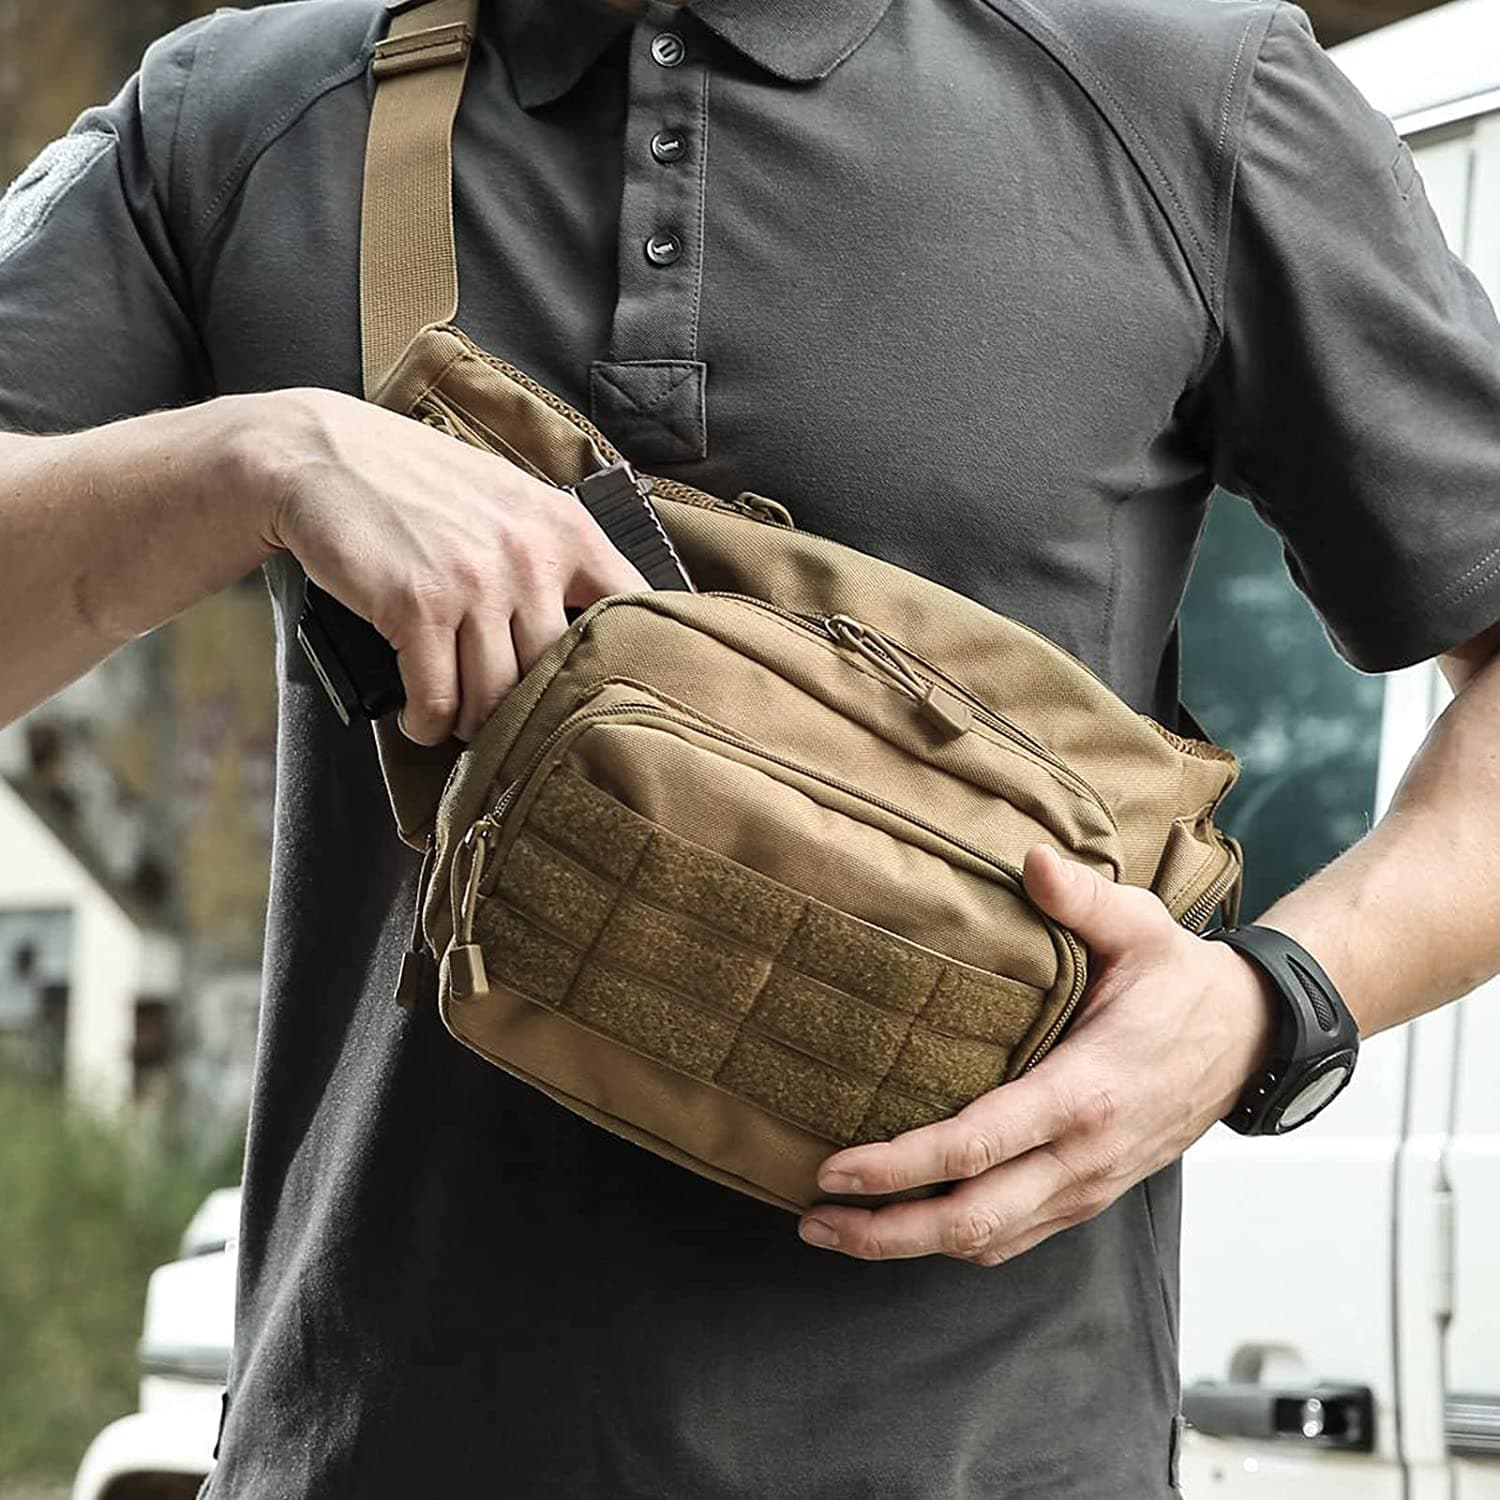 Tactical Military Portable Concealed Pistol Waist Bag